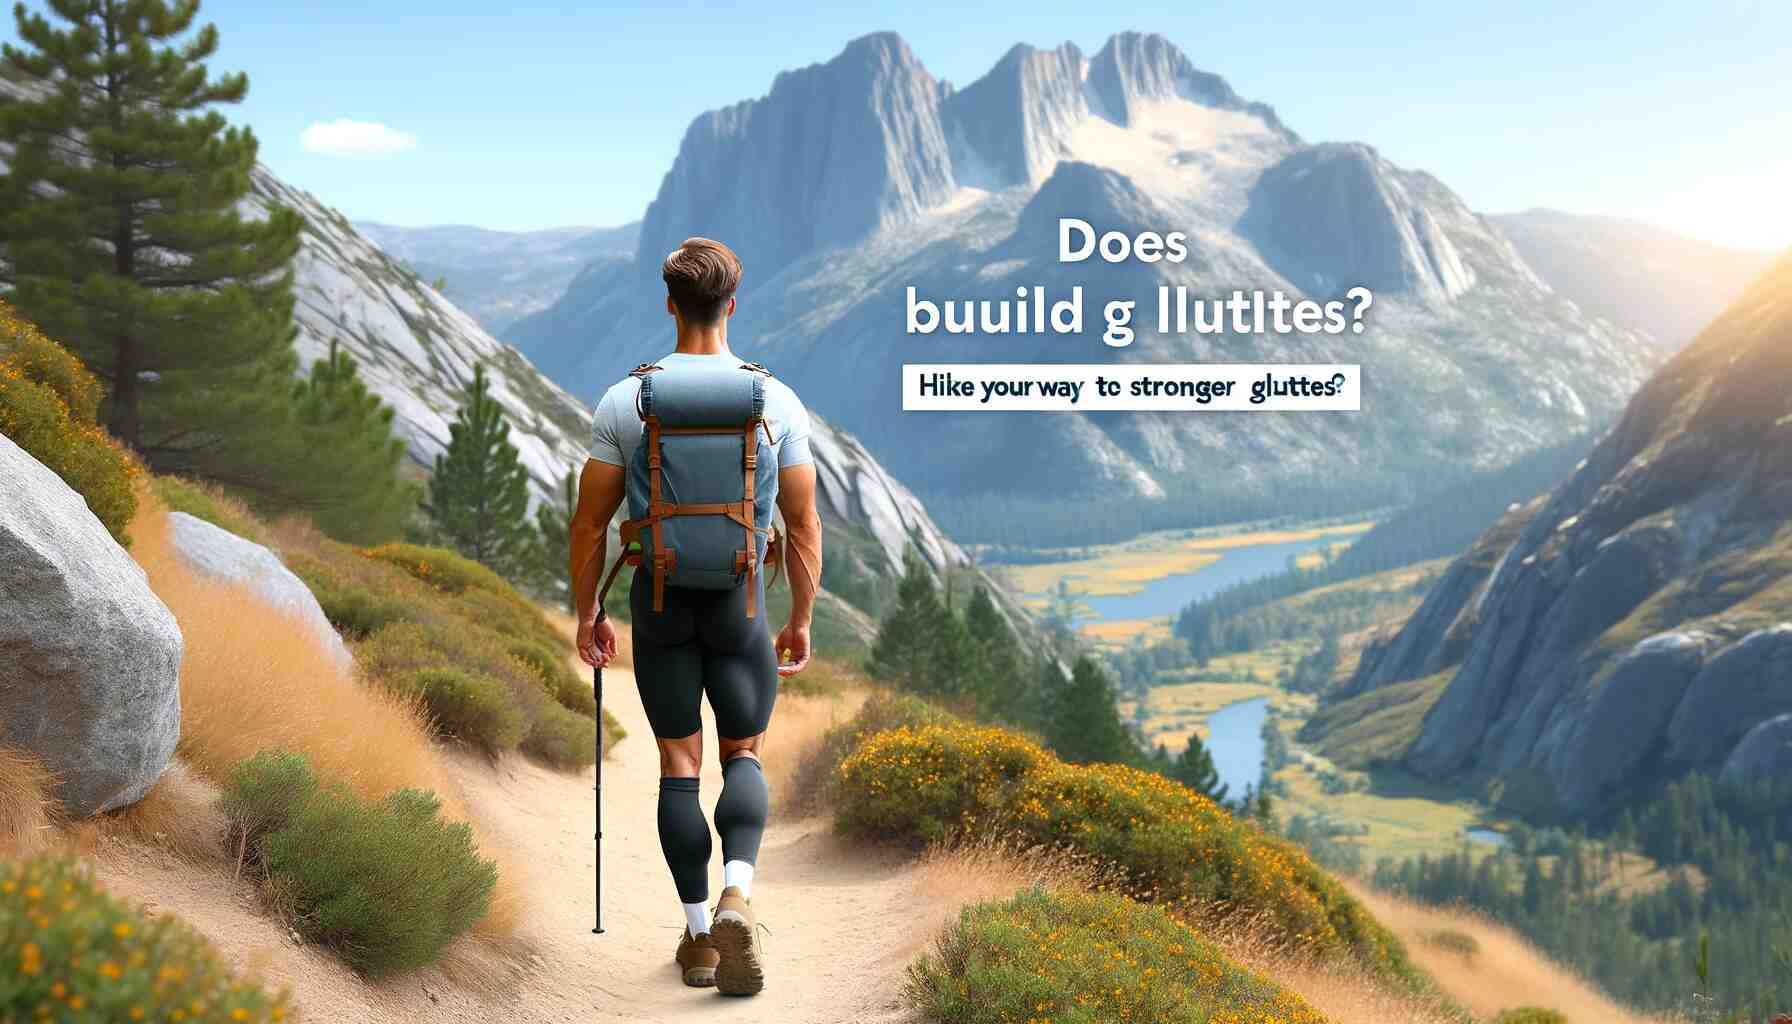 Does Hiking Build Glutes? Hike Your Way to Stronger Glutes